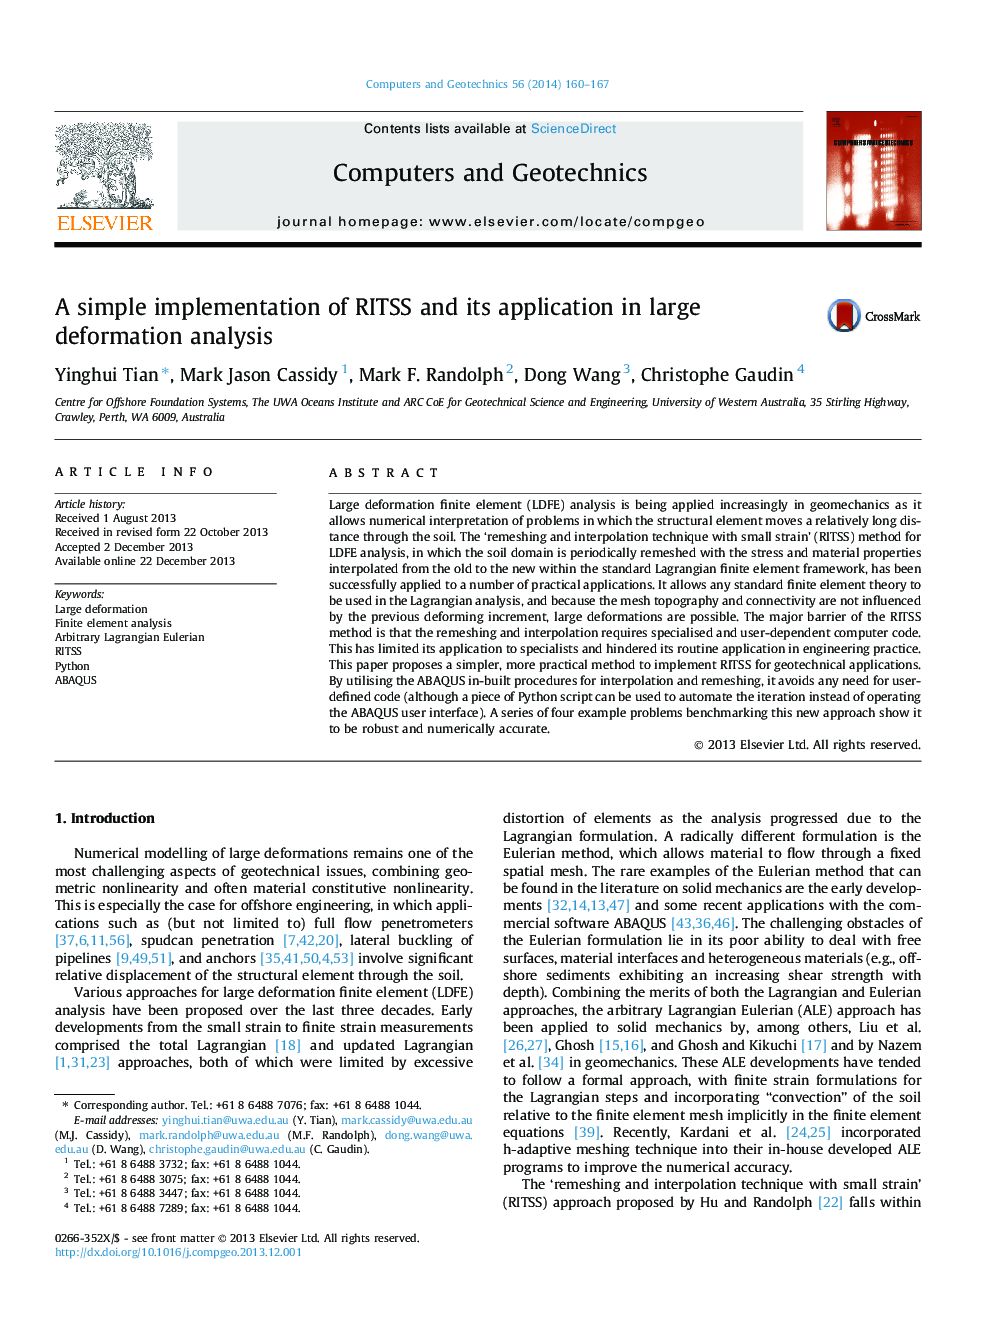 A simple implementation of RITSS and its application in large deformation analysis